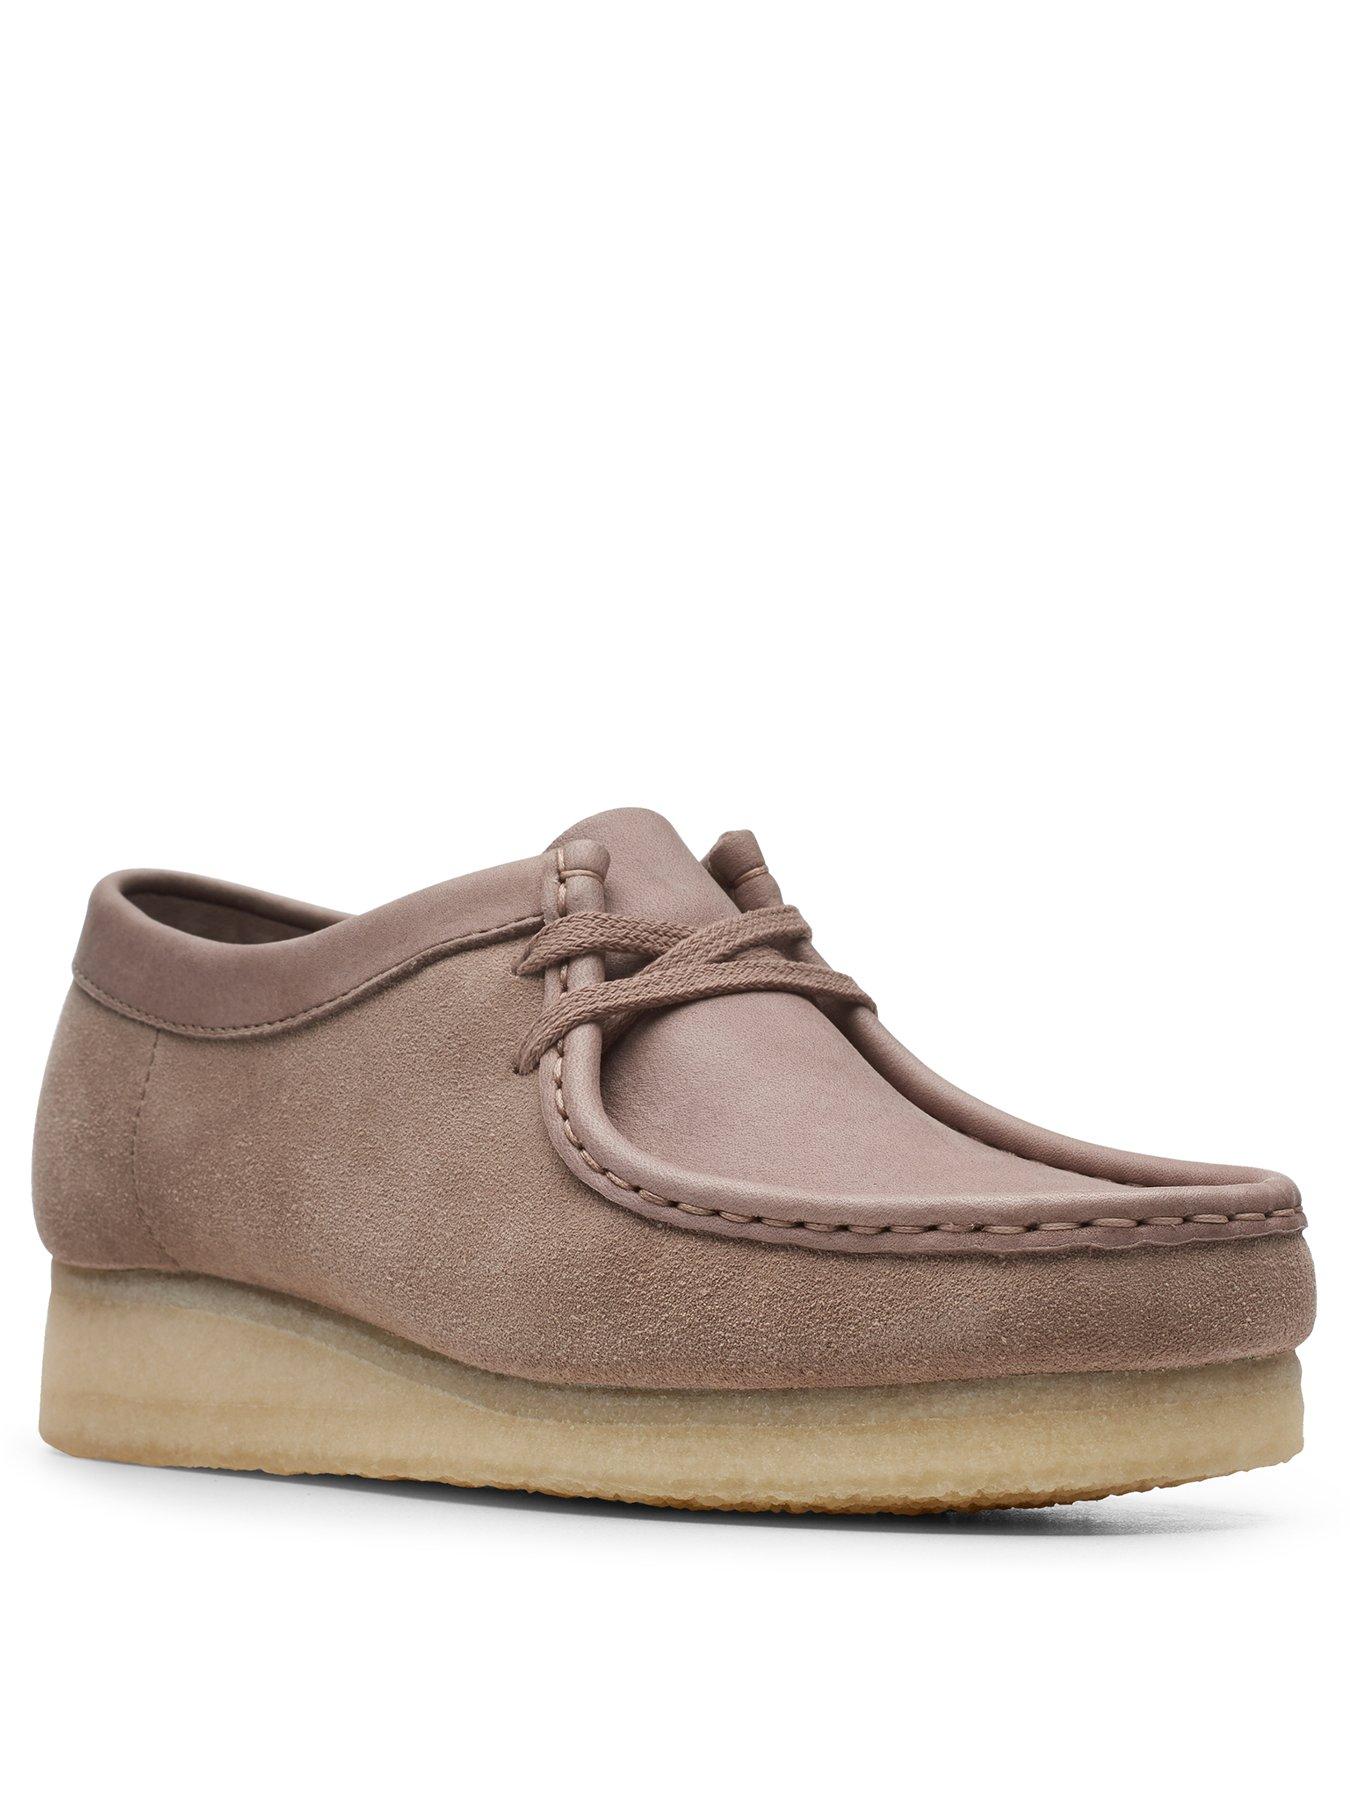 leather wallabee clarks